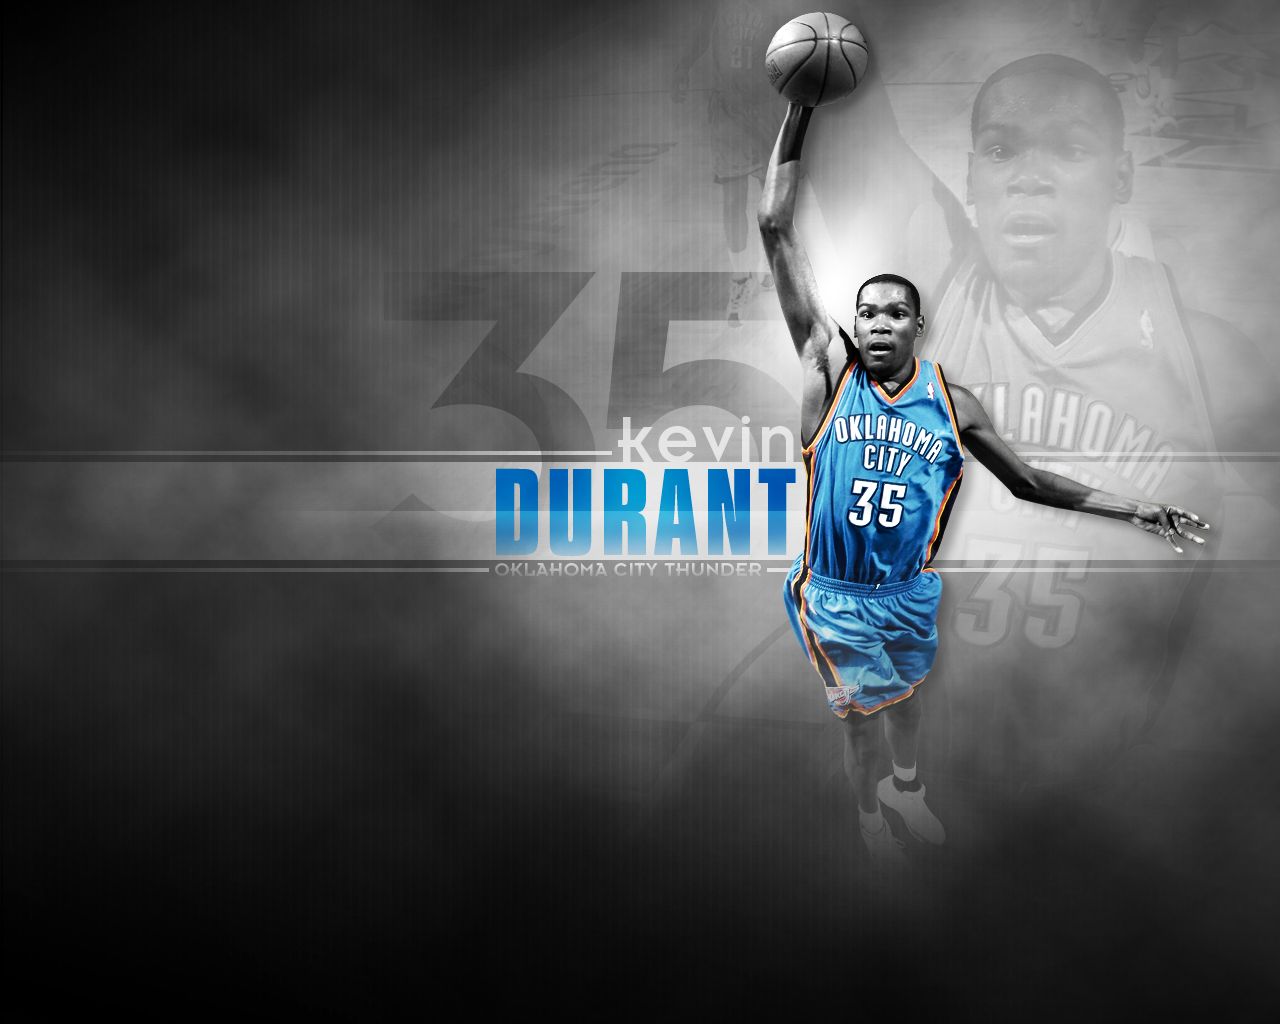 Kevin Durant Wallpaper, Kevin Durant Backgrounds, New Backgrounds